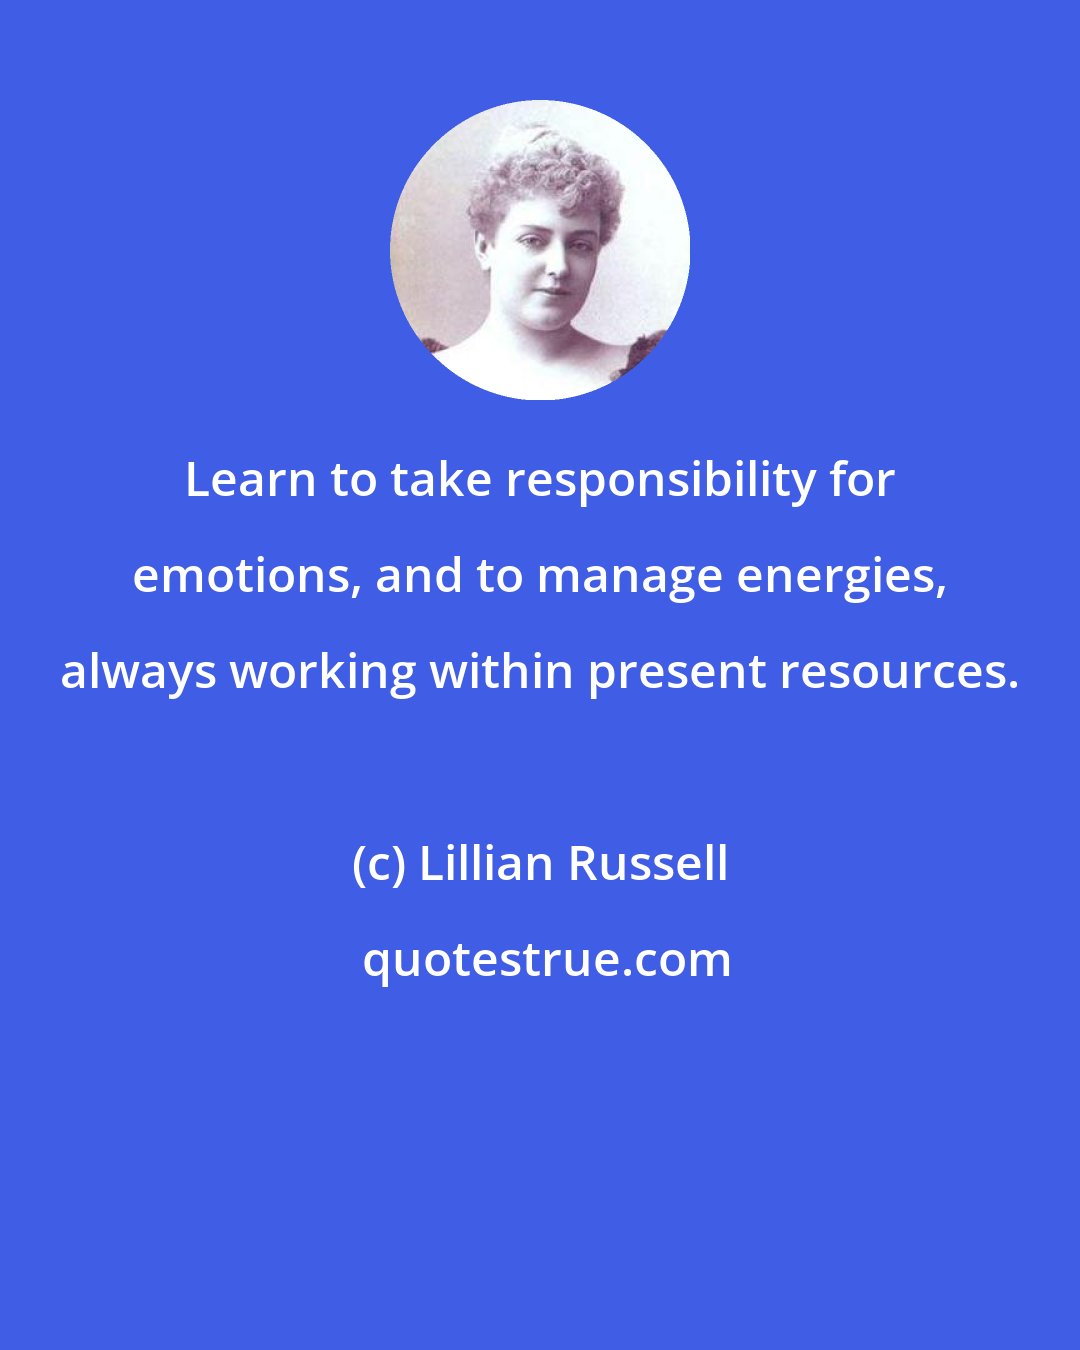 Lillian Russell: Learn to take responsibility for emotions, and to manage energies, always working within present resources.